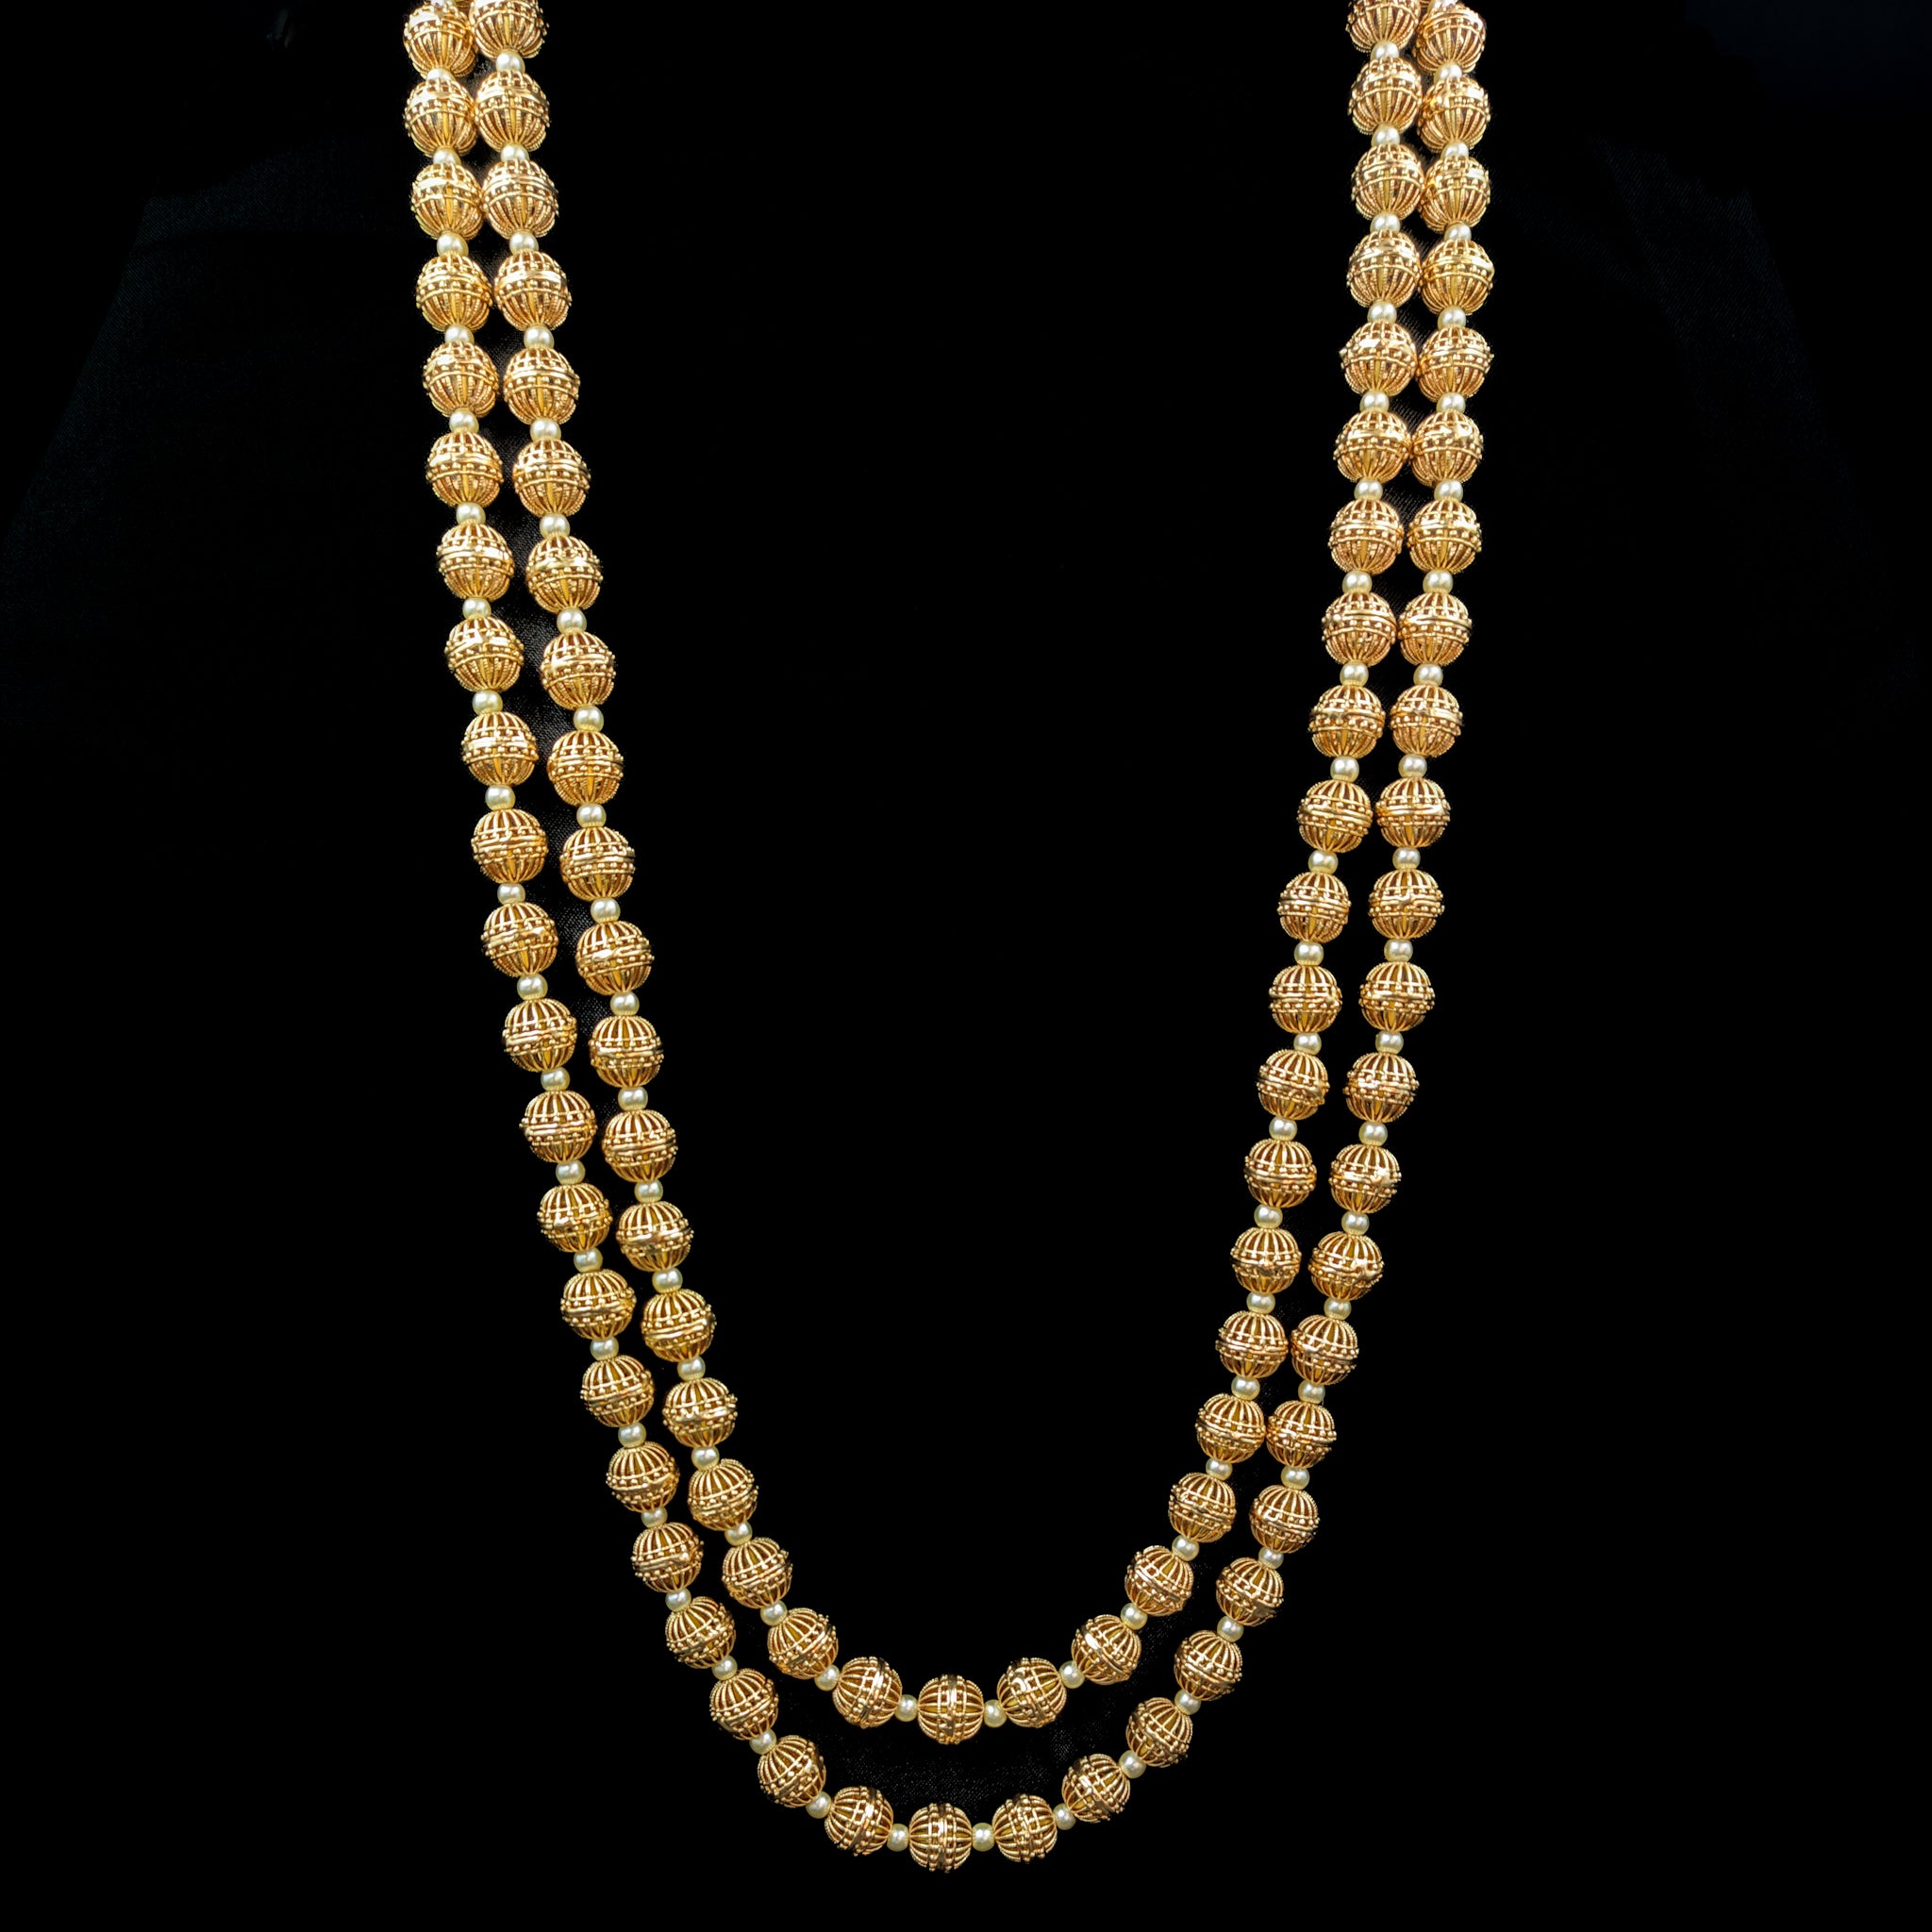 Long Neck Pearl Necklace Set 6485-28 - Dazzles Jewellery